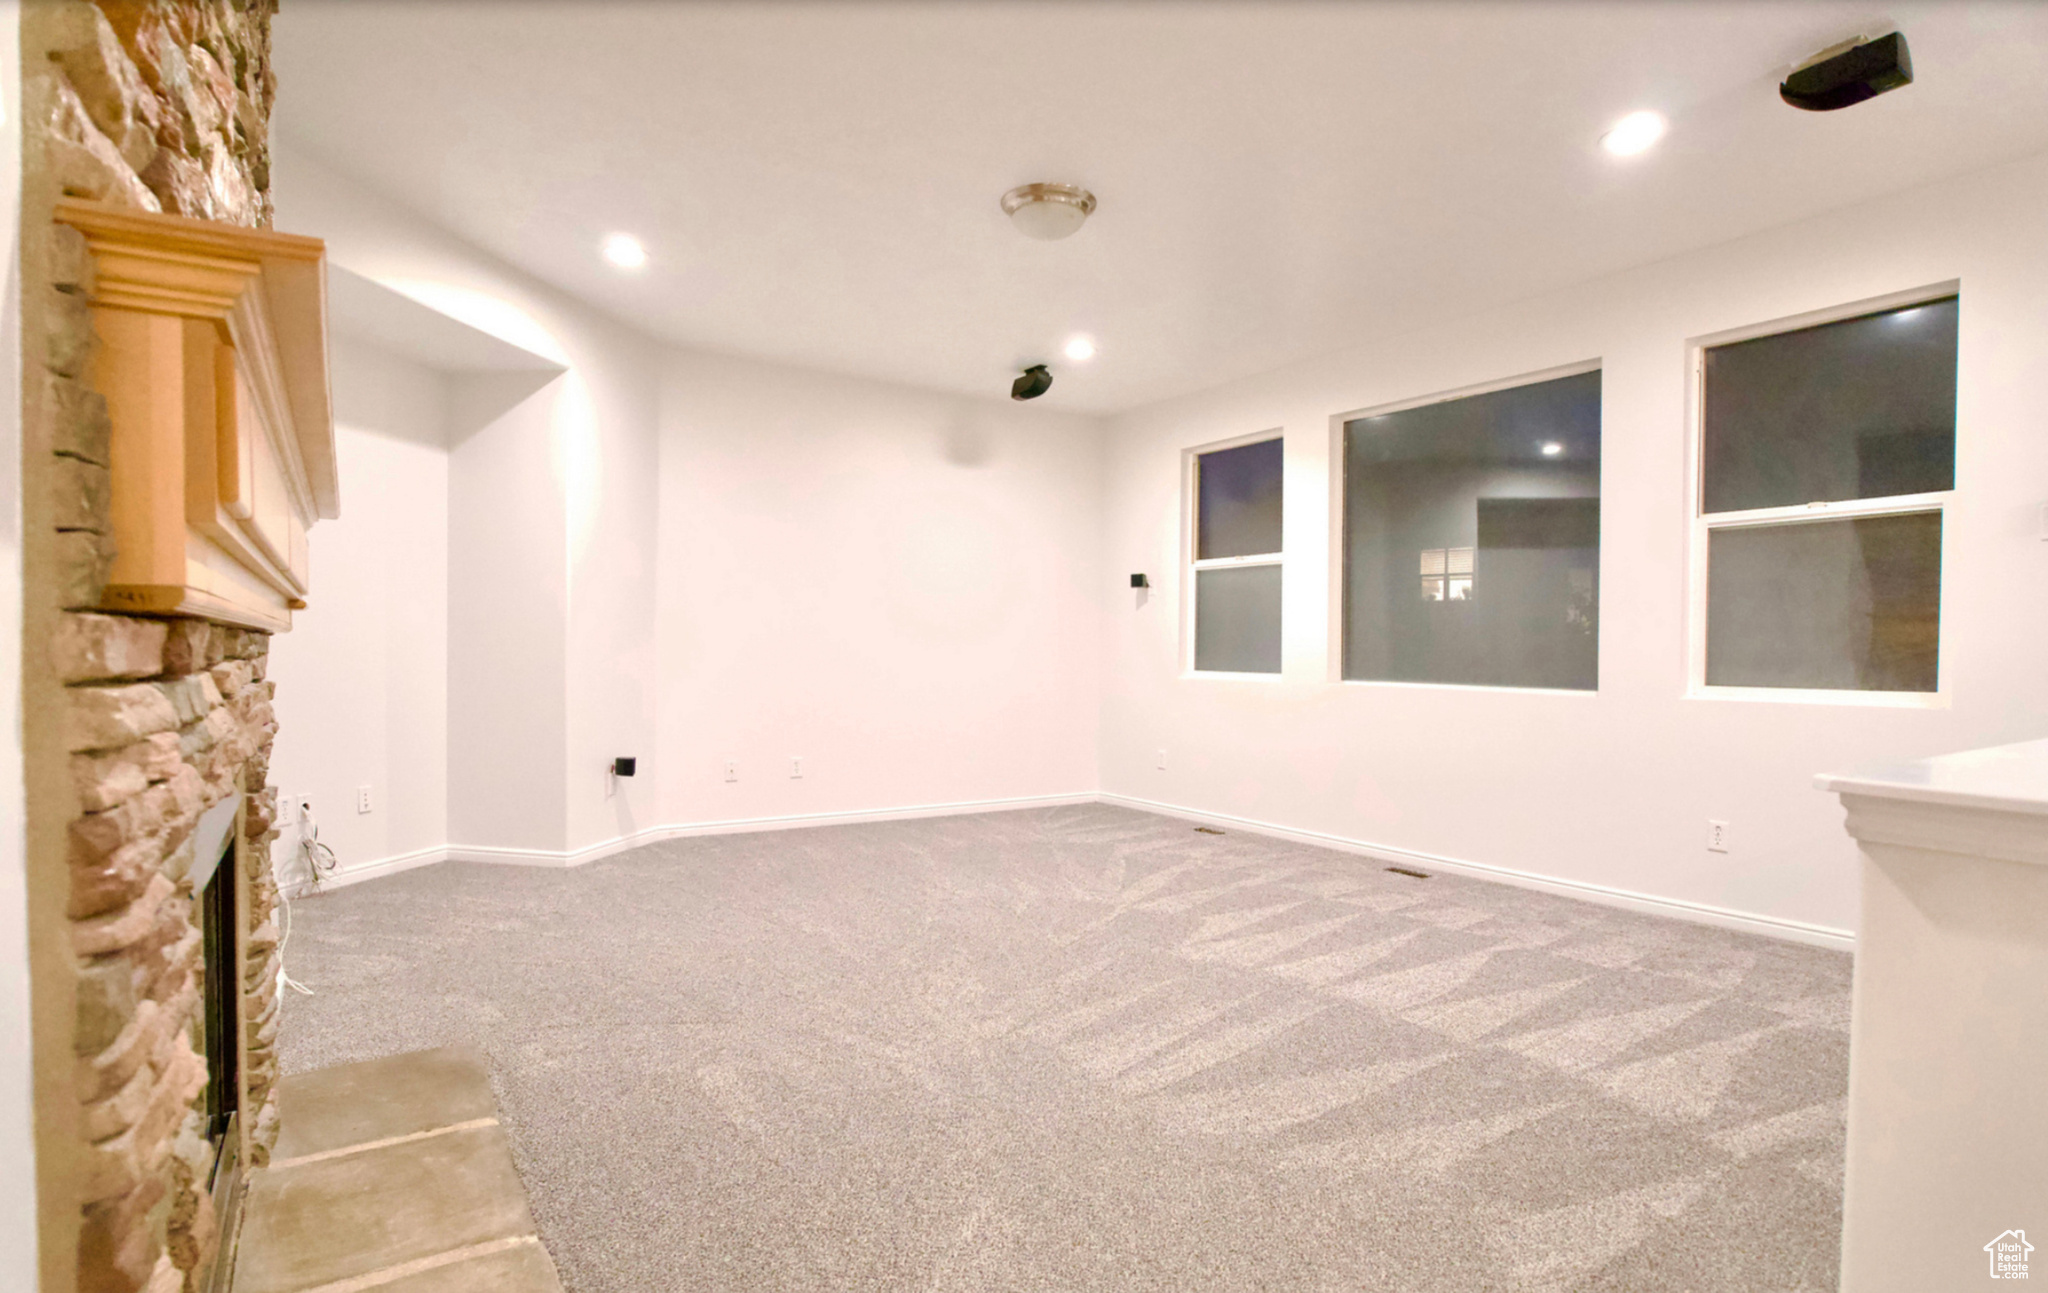 Interior space with light colored carpet and a stone fireplace